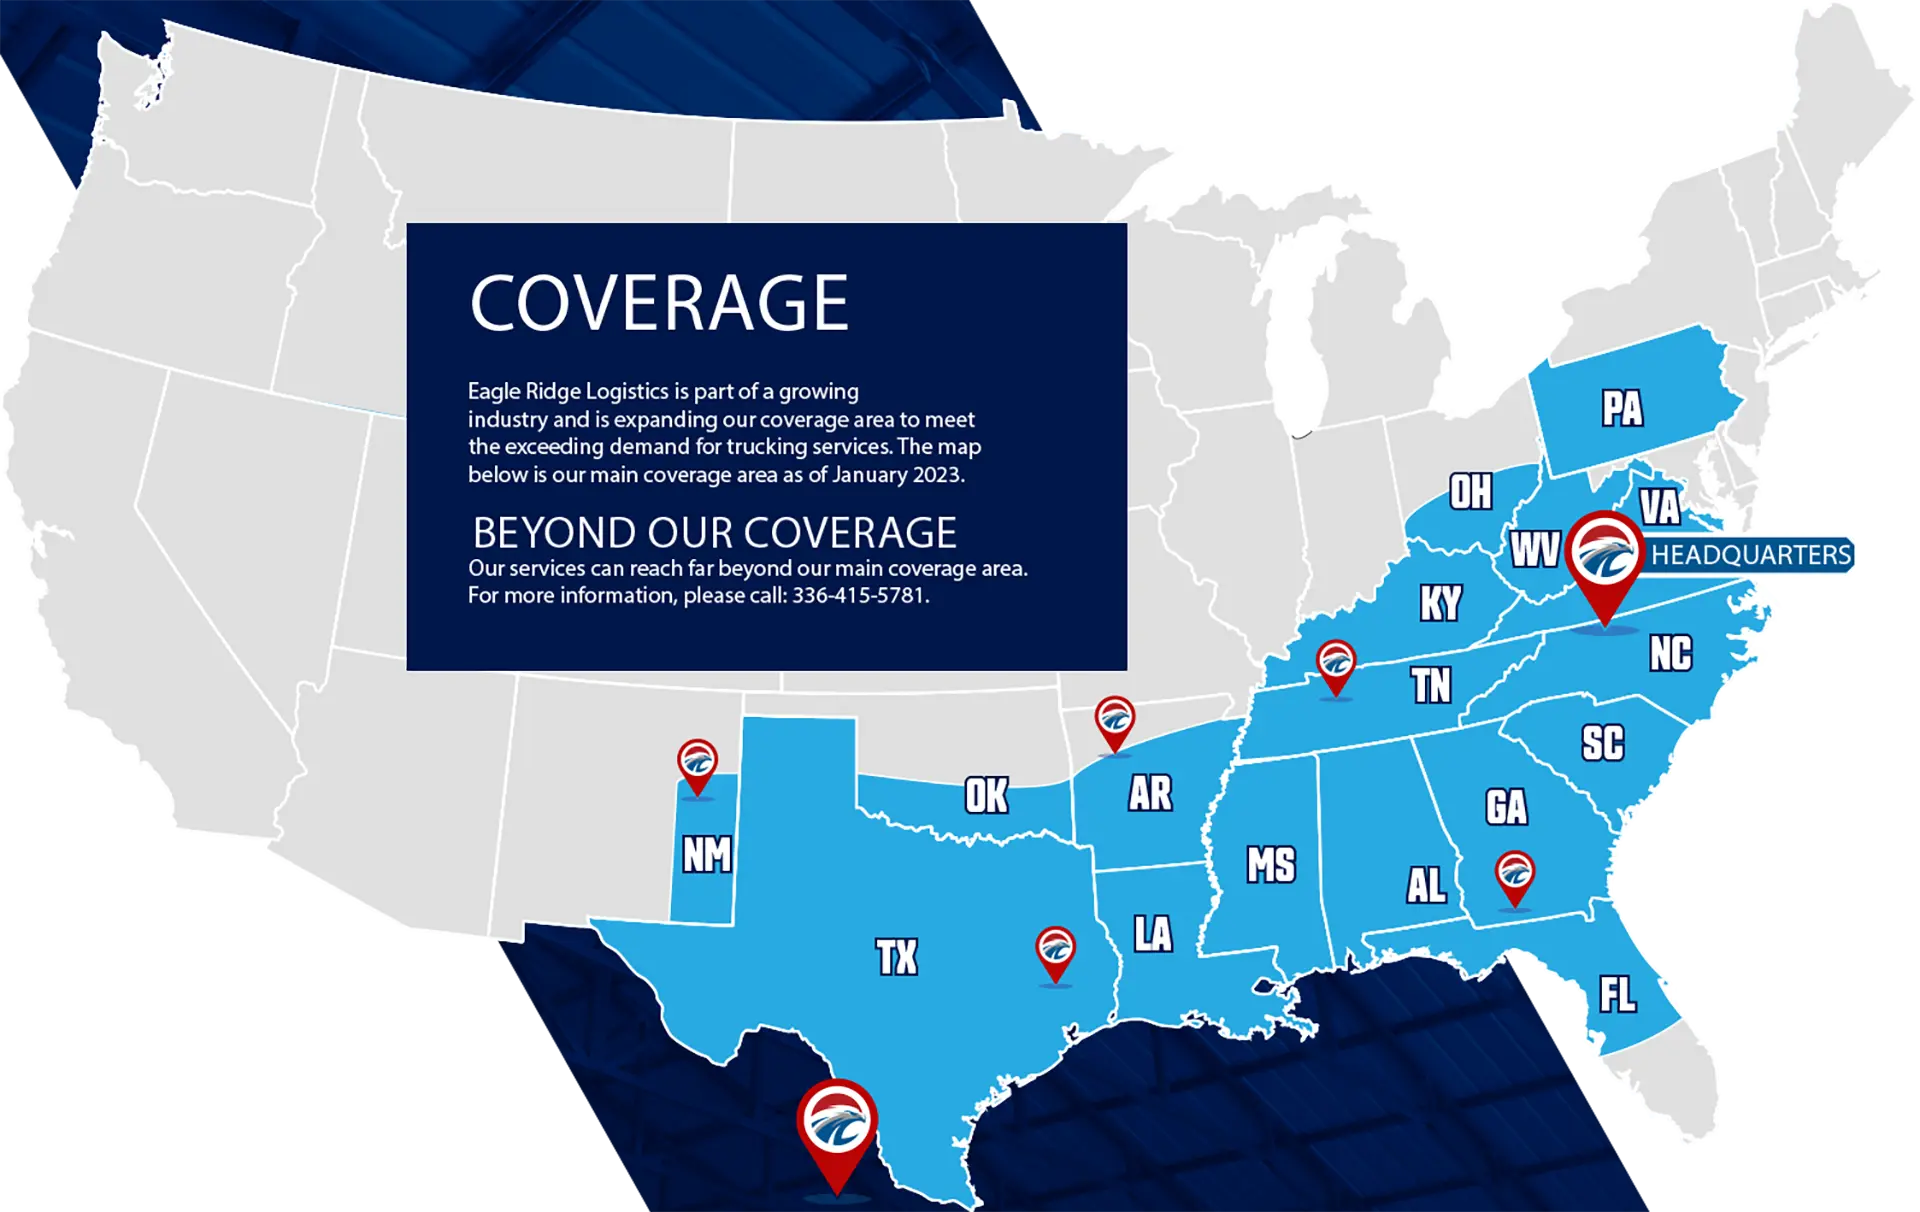 The map is our main coverage area as of January 2023.